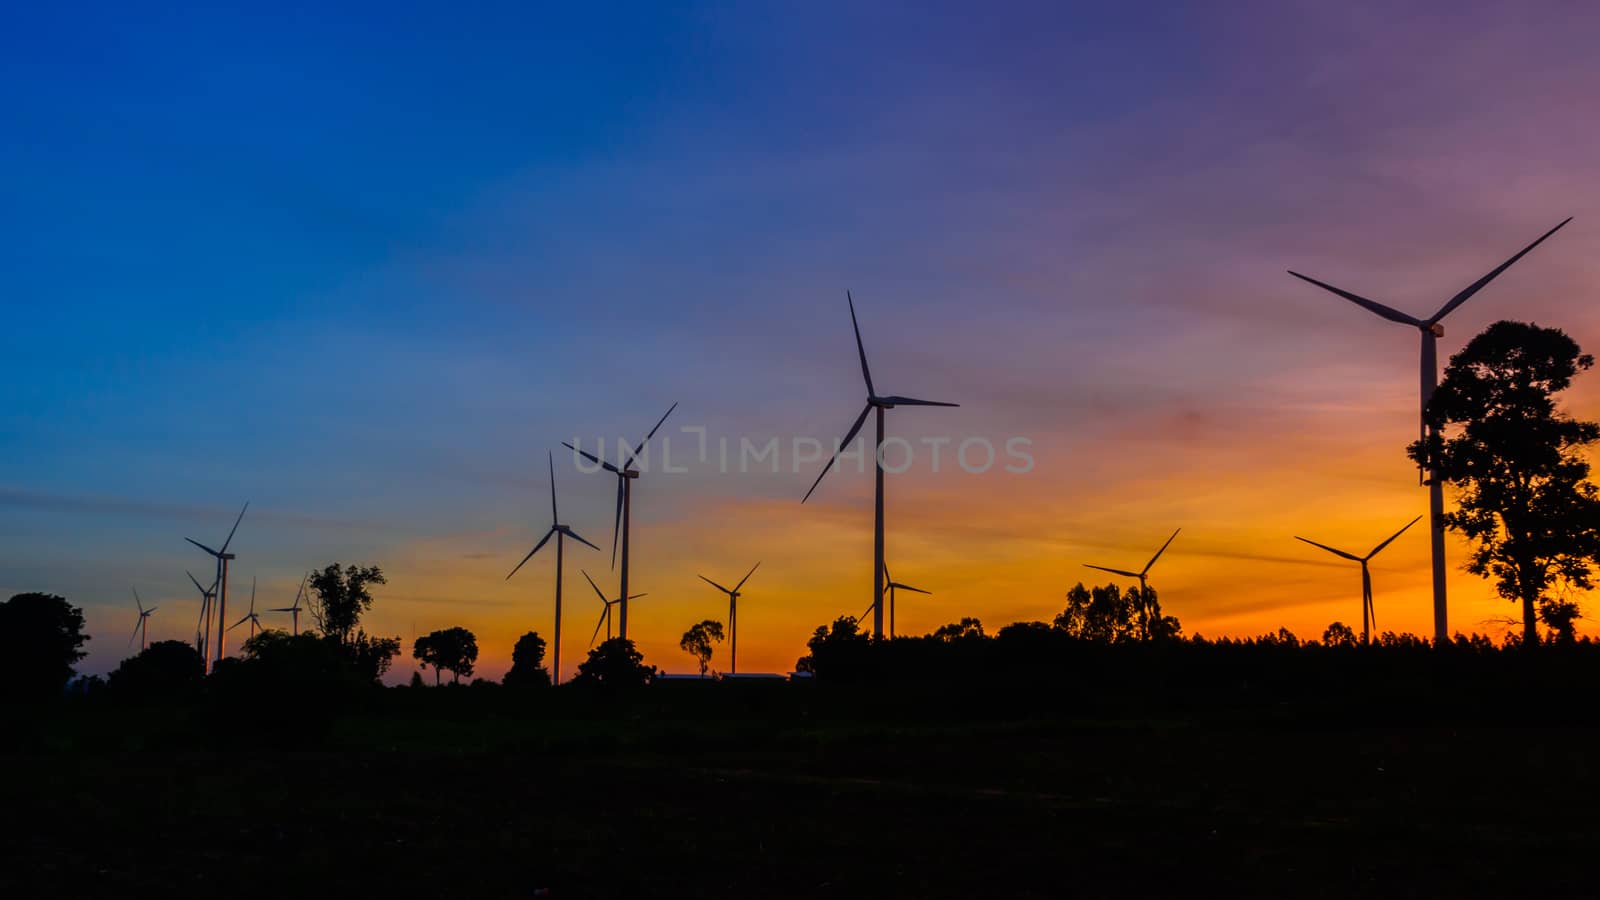 Wind turbines silhouette at sunset by joeasy